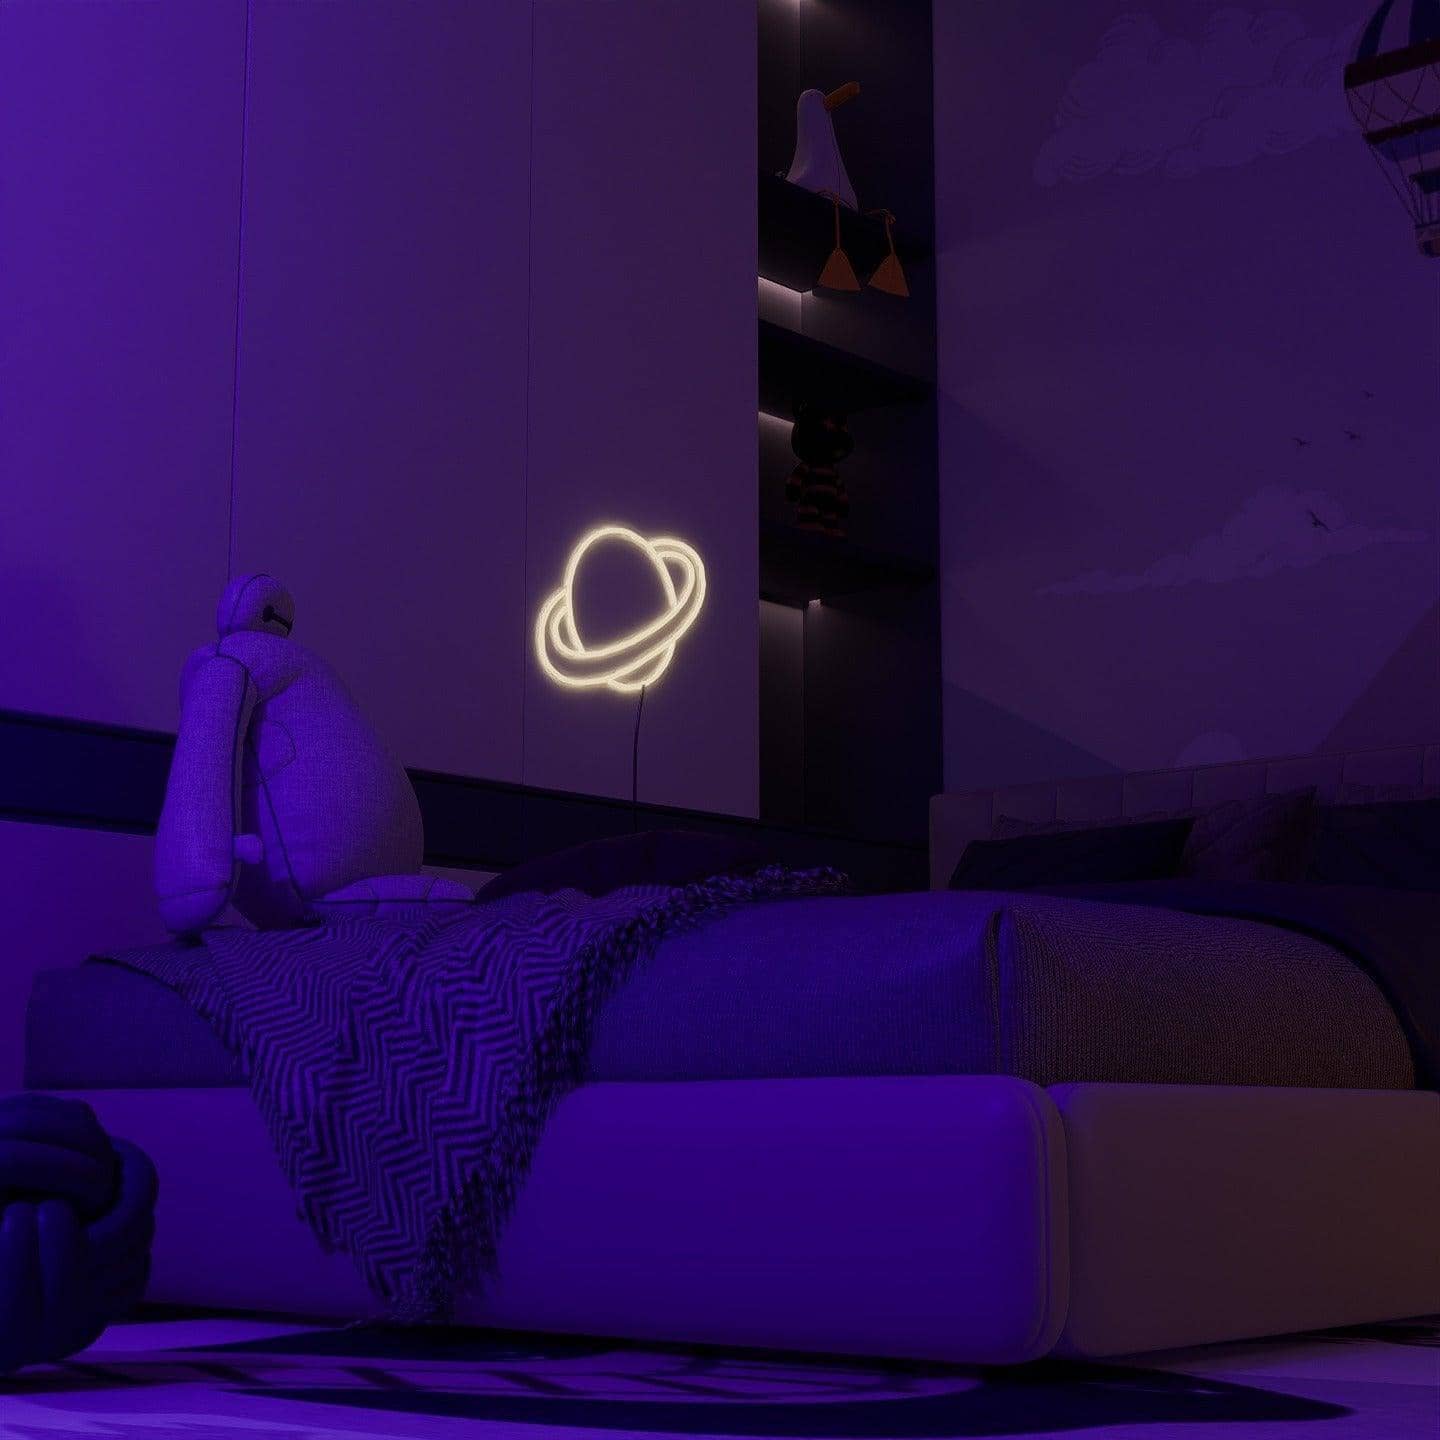 light-up-neon-lights-and-hang-them-in-your-bedroom-for-display-saturn